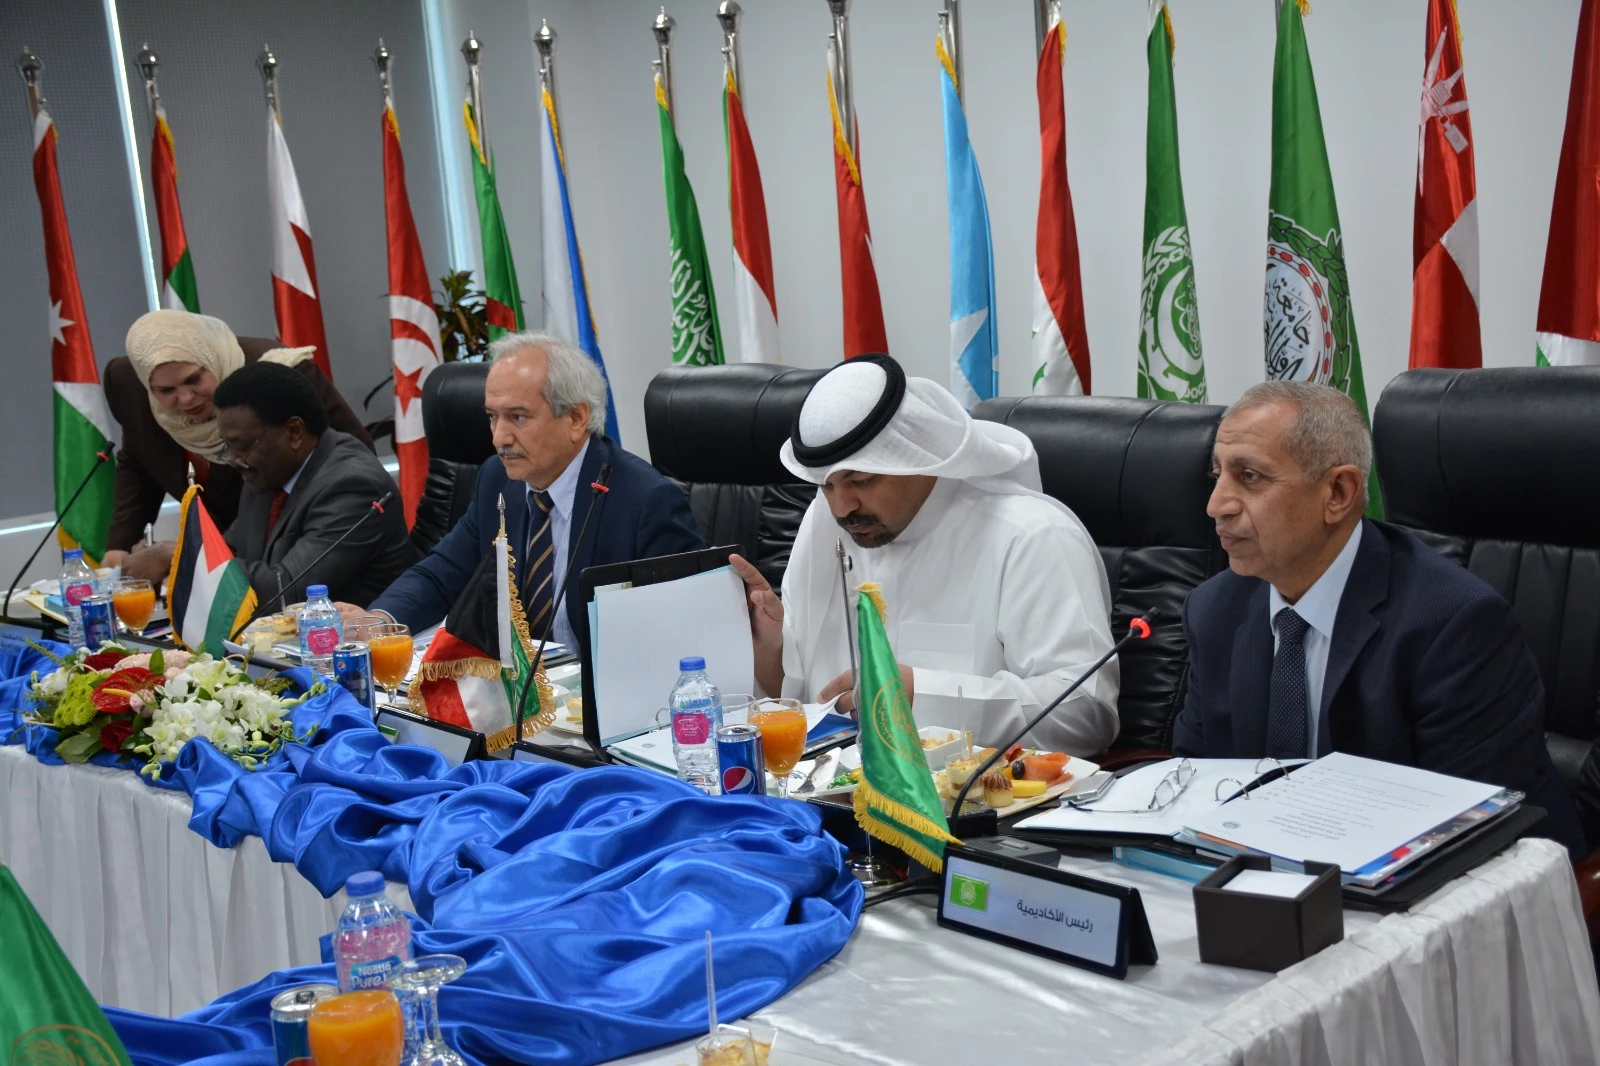 The thirty-seventh regular session of the Executive Council of the Arab Academy for Science, Technology, and Maritime Transport was held2